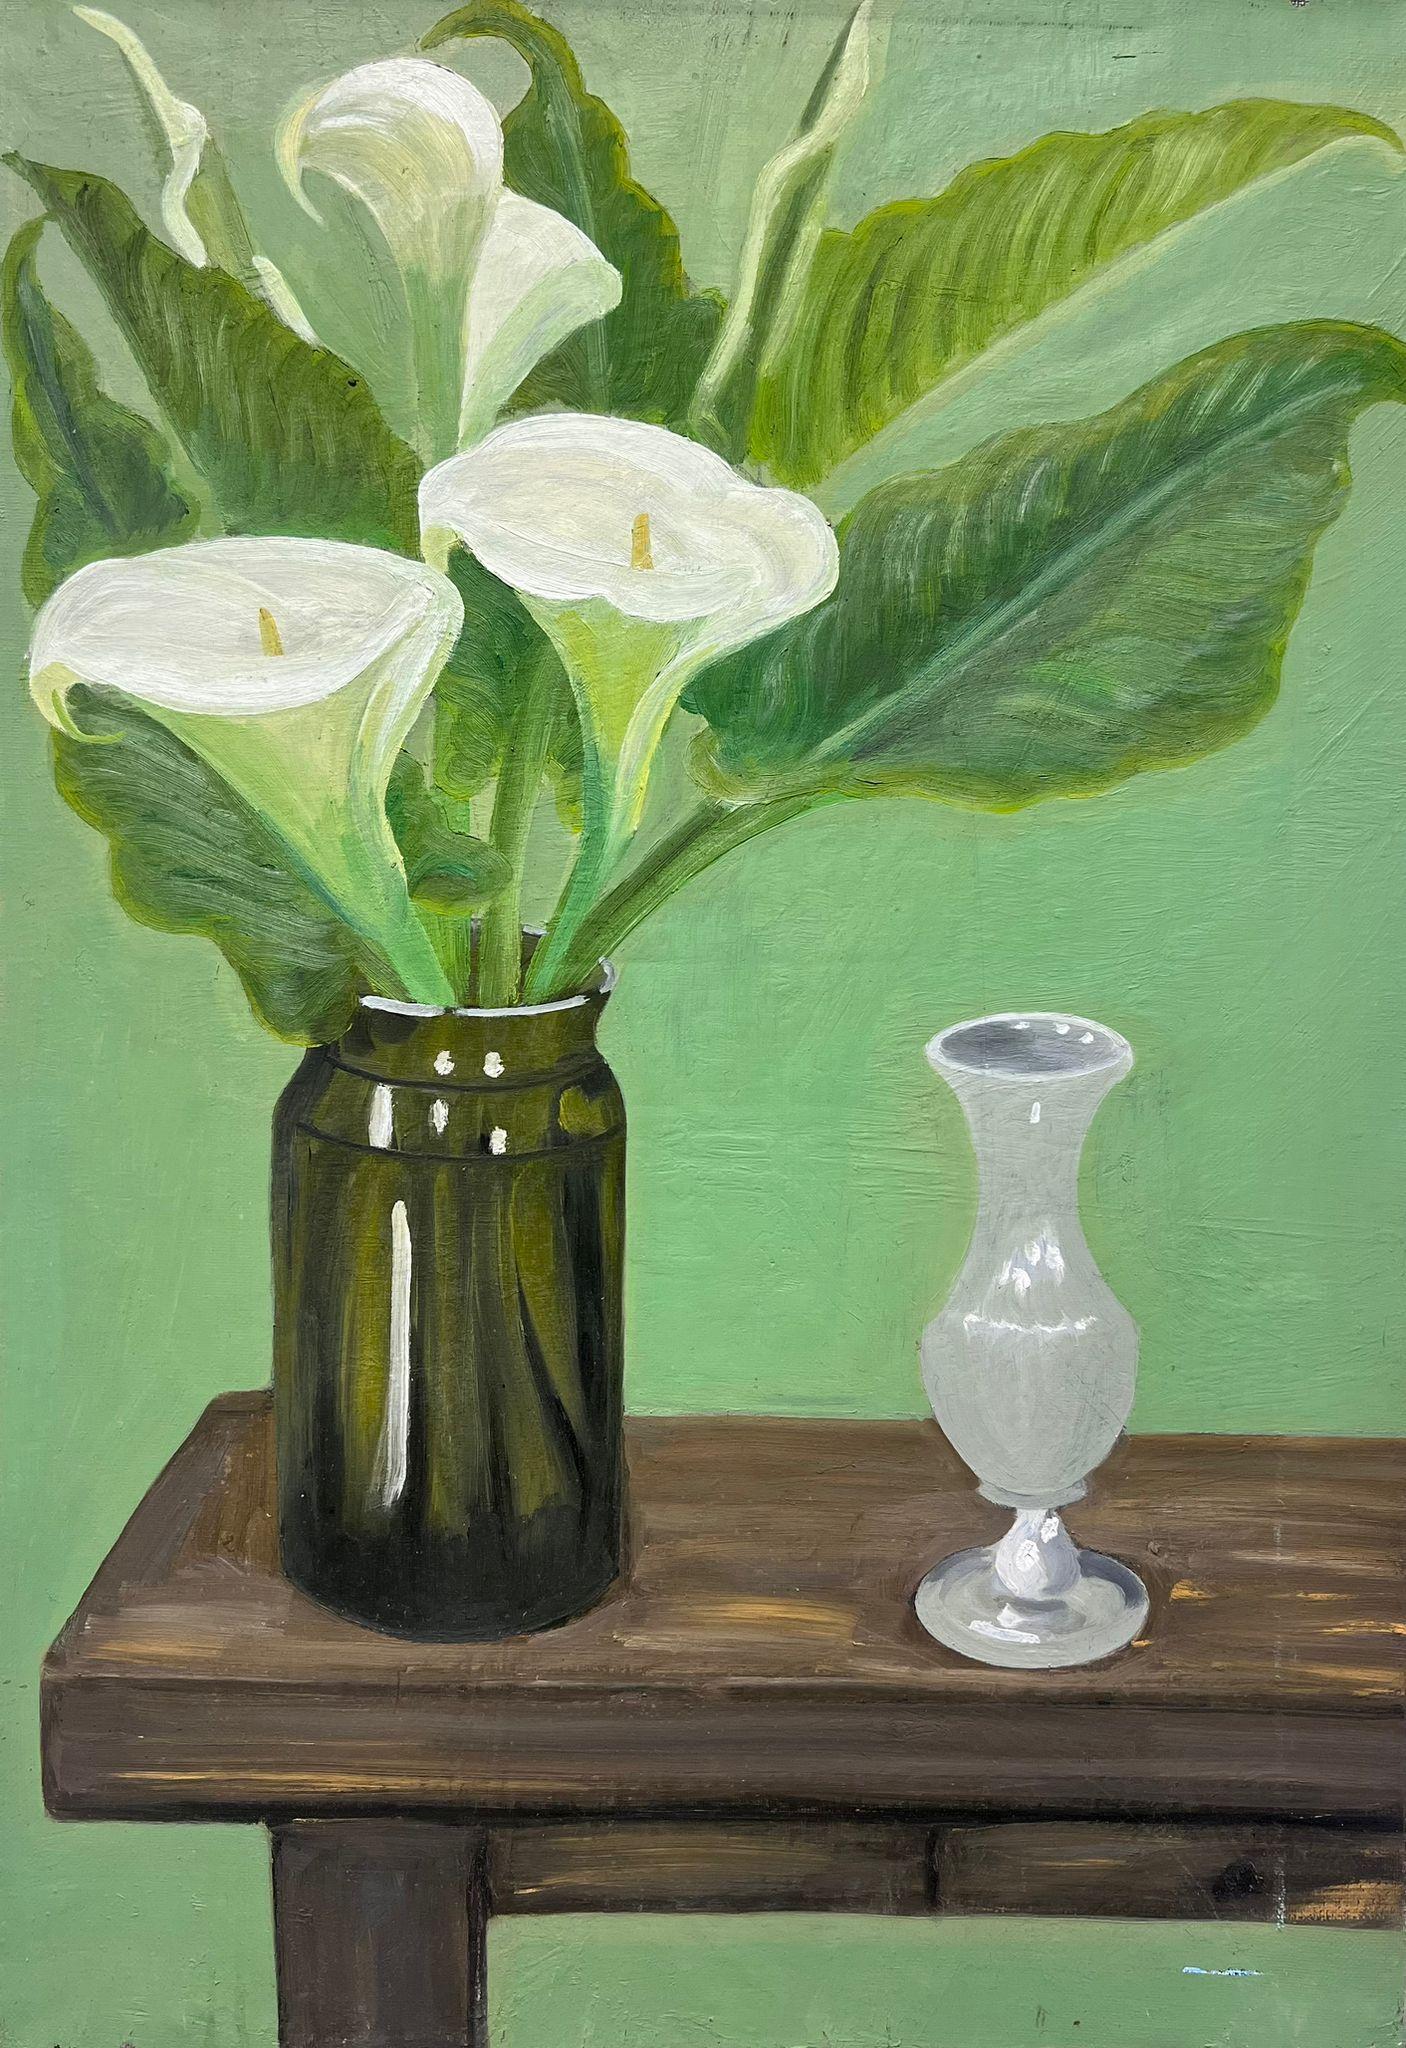 Louise Alix Still-Life Painting - French Impressionist Oil Interior Painting Calla White Lillies On Wooden Bench